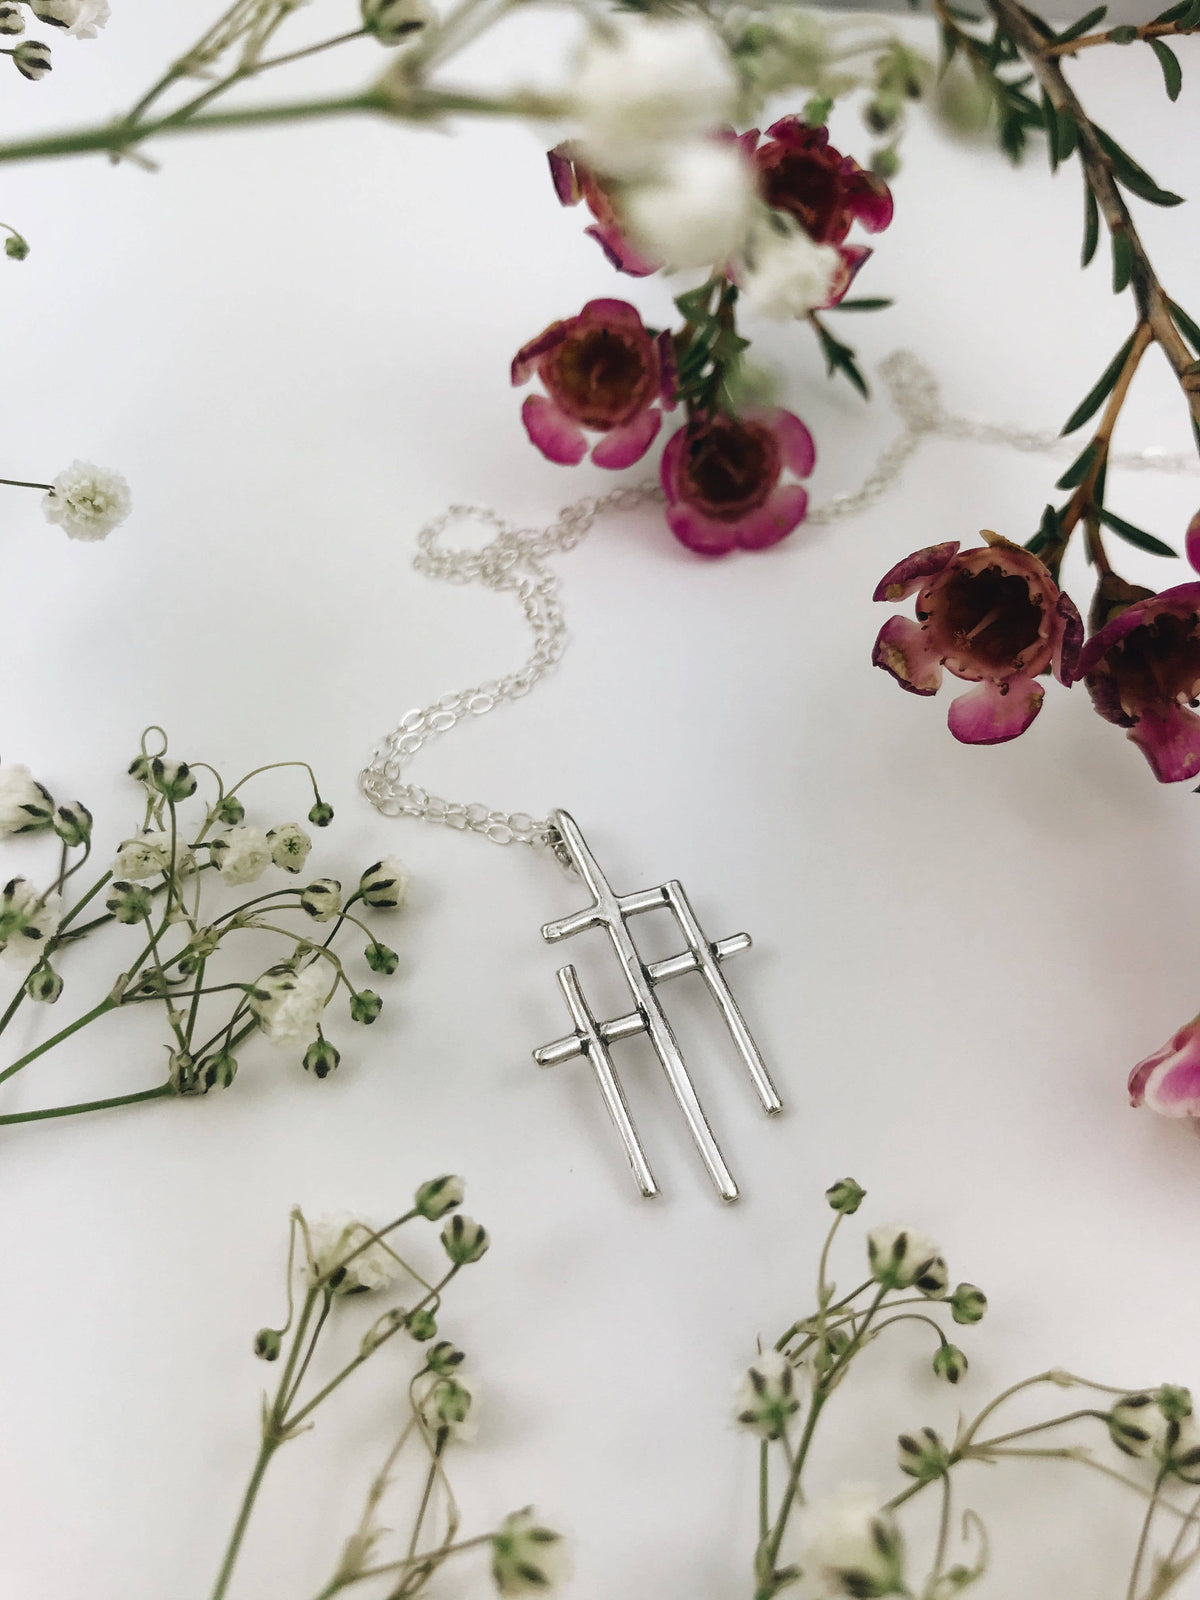 At the Cross | Sterling Silver Necklace